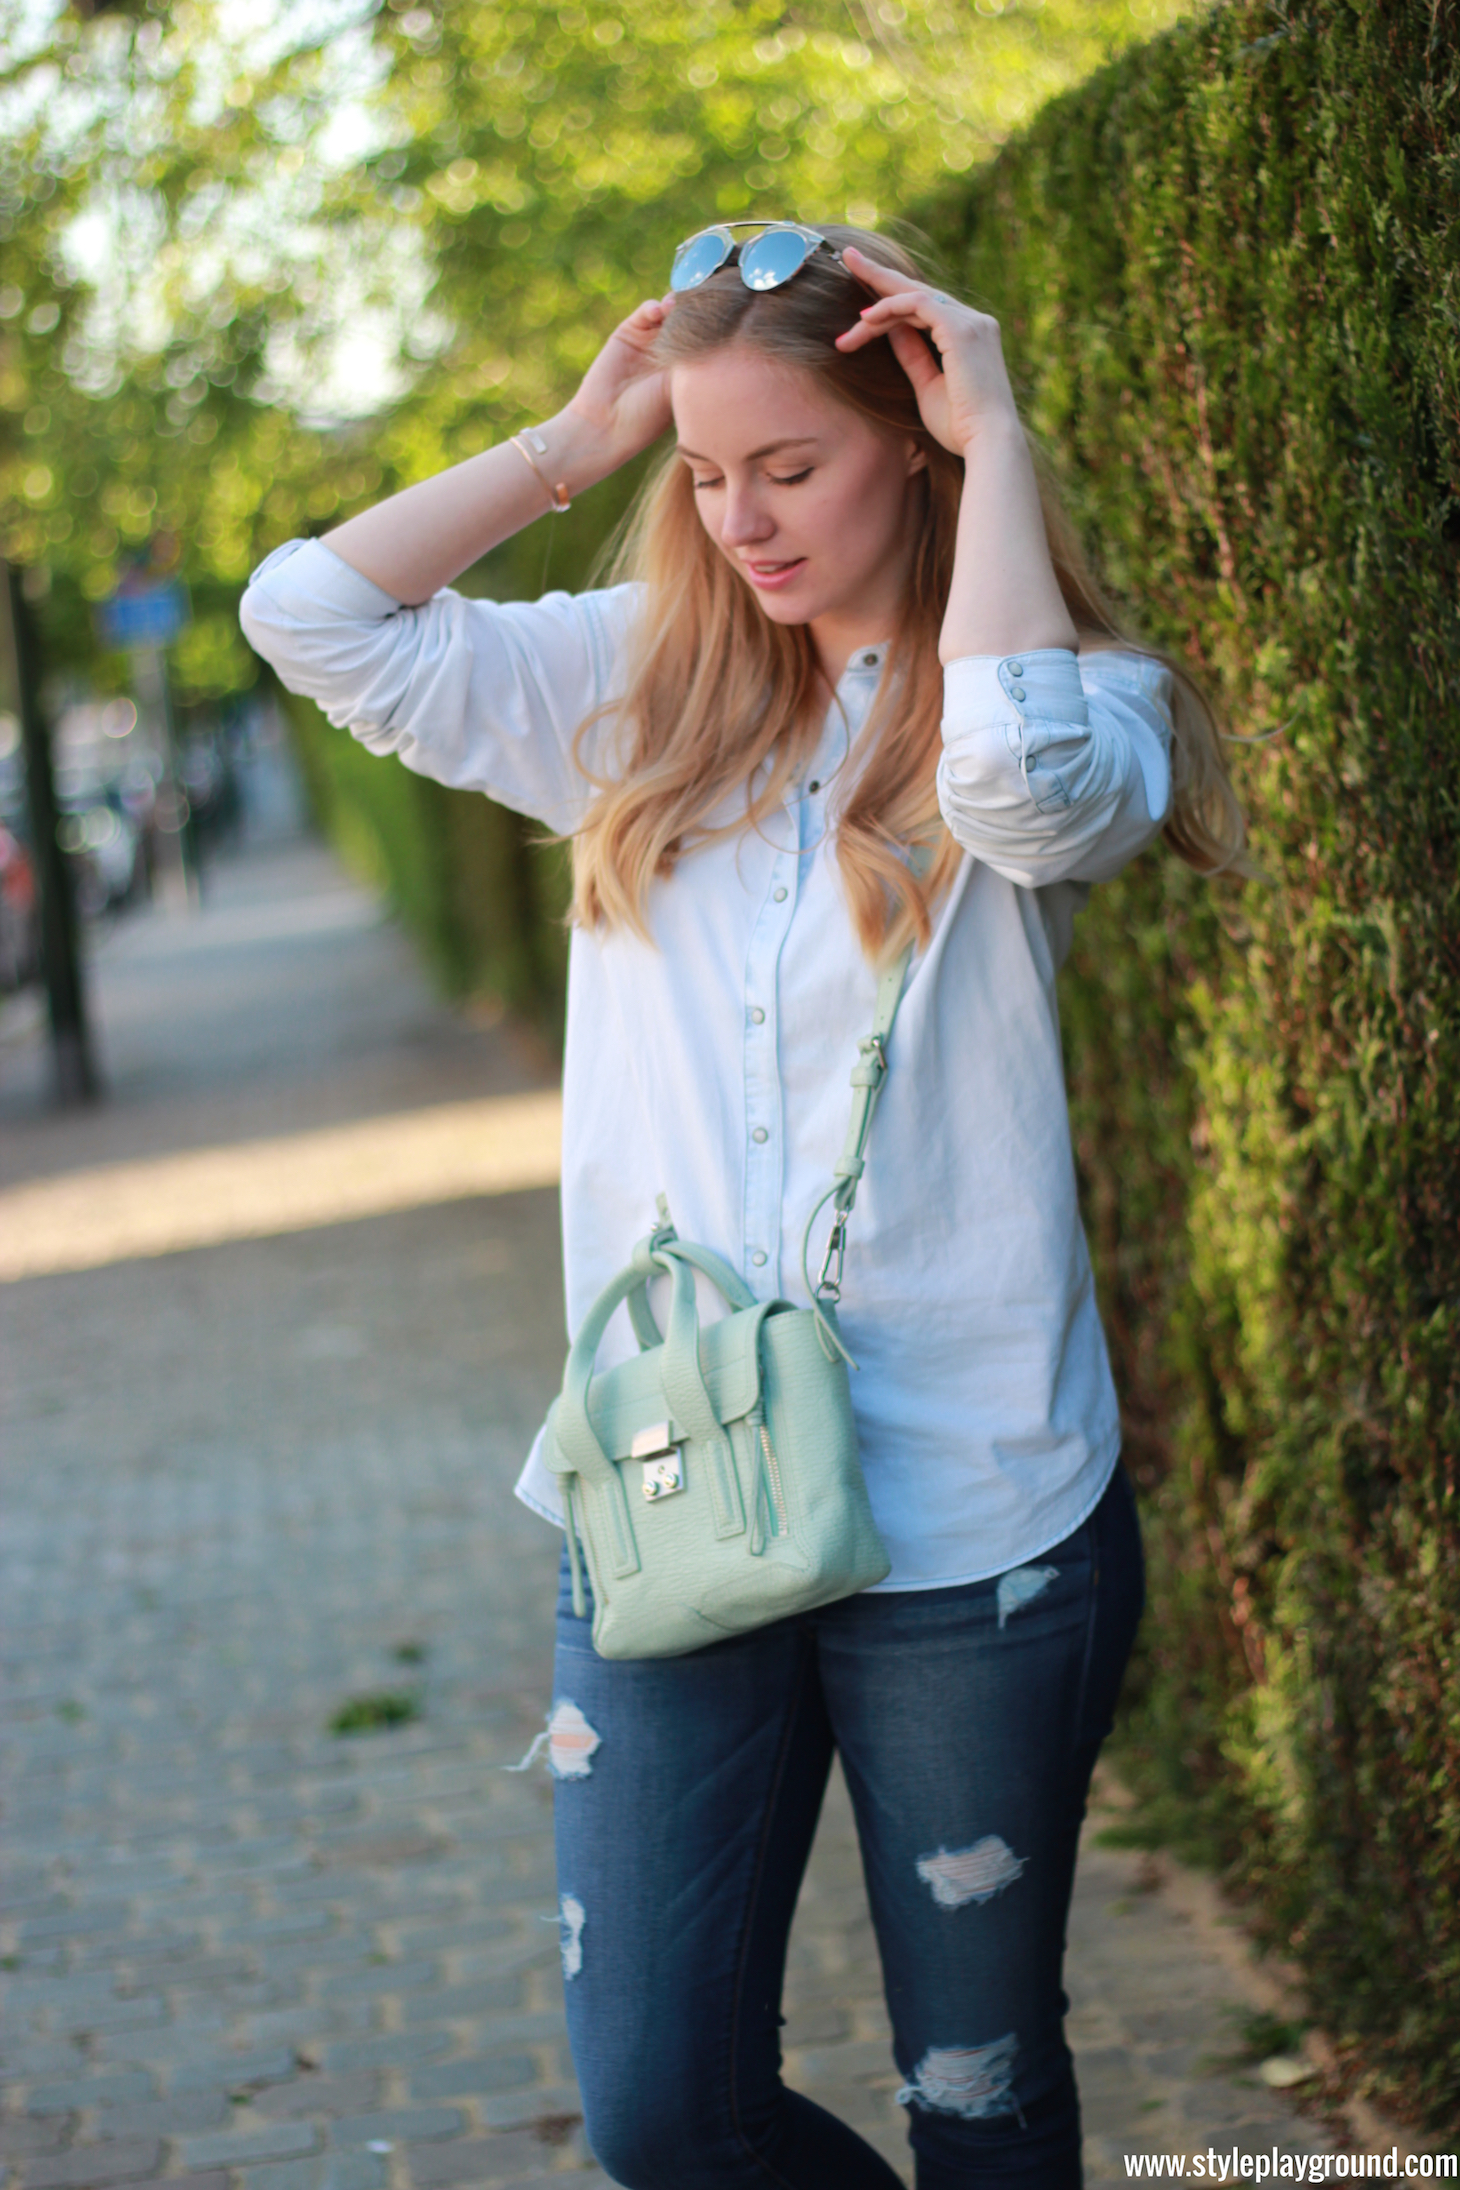 Axelle Blanpain of Style playground is wearing a Zara denim shirt, American Eagle ripped jeans, white Converse, Phillip Lim bag, Tiffany T bracelet and Cartier love bracelet